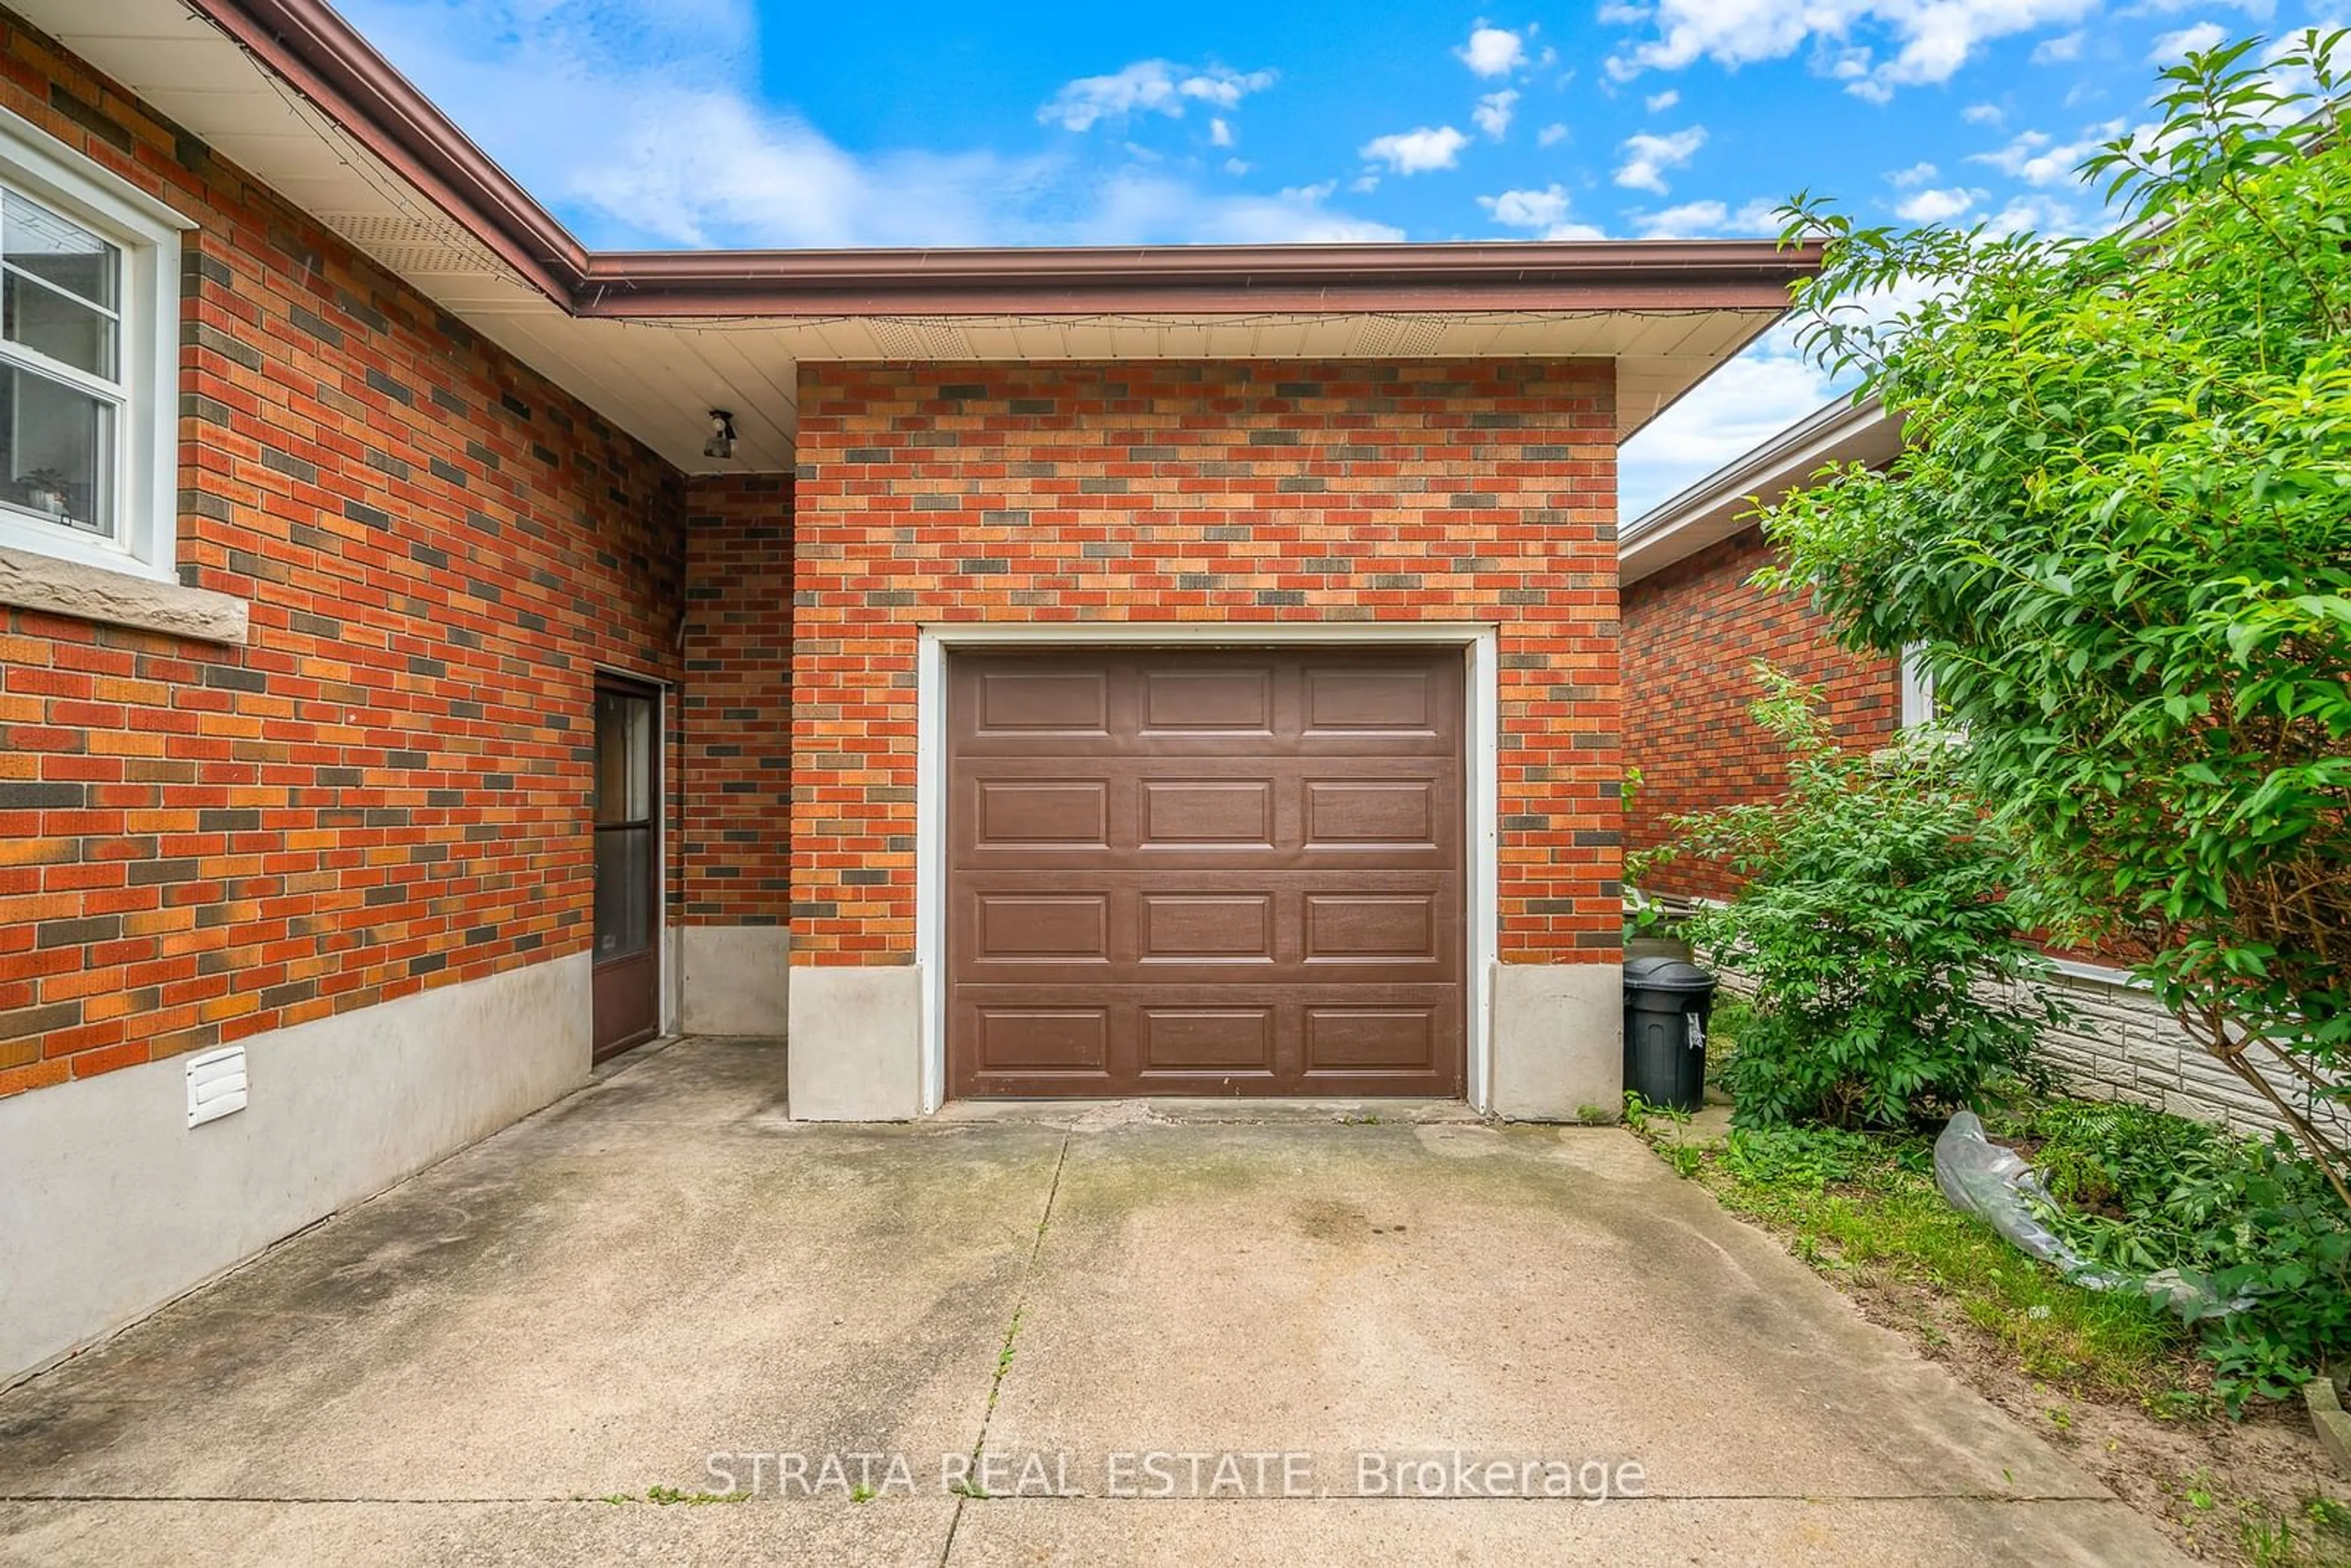 Home with brick exterior material for 18 Chalmers St, St. Catharines Ontario L2M 5C8